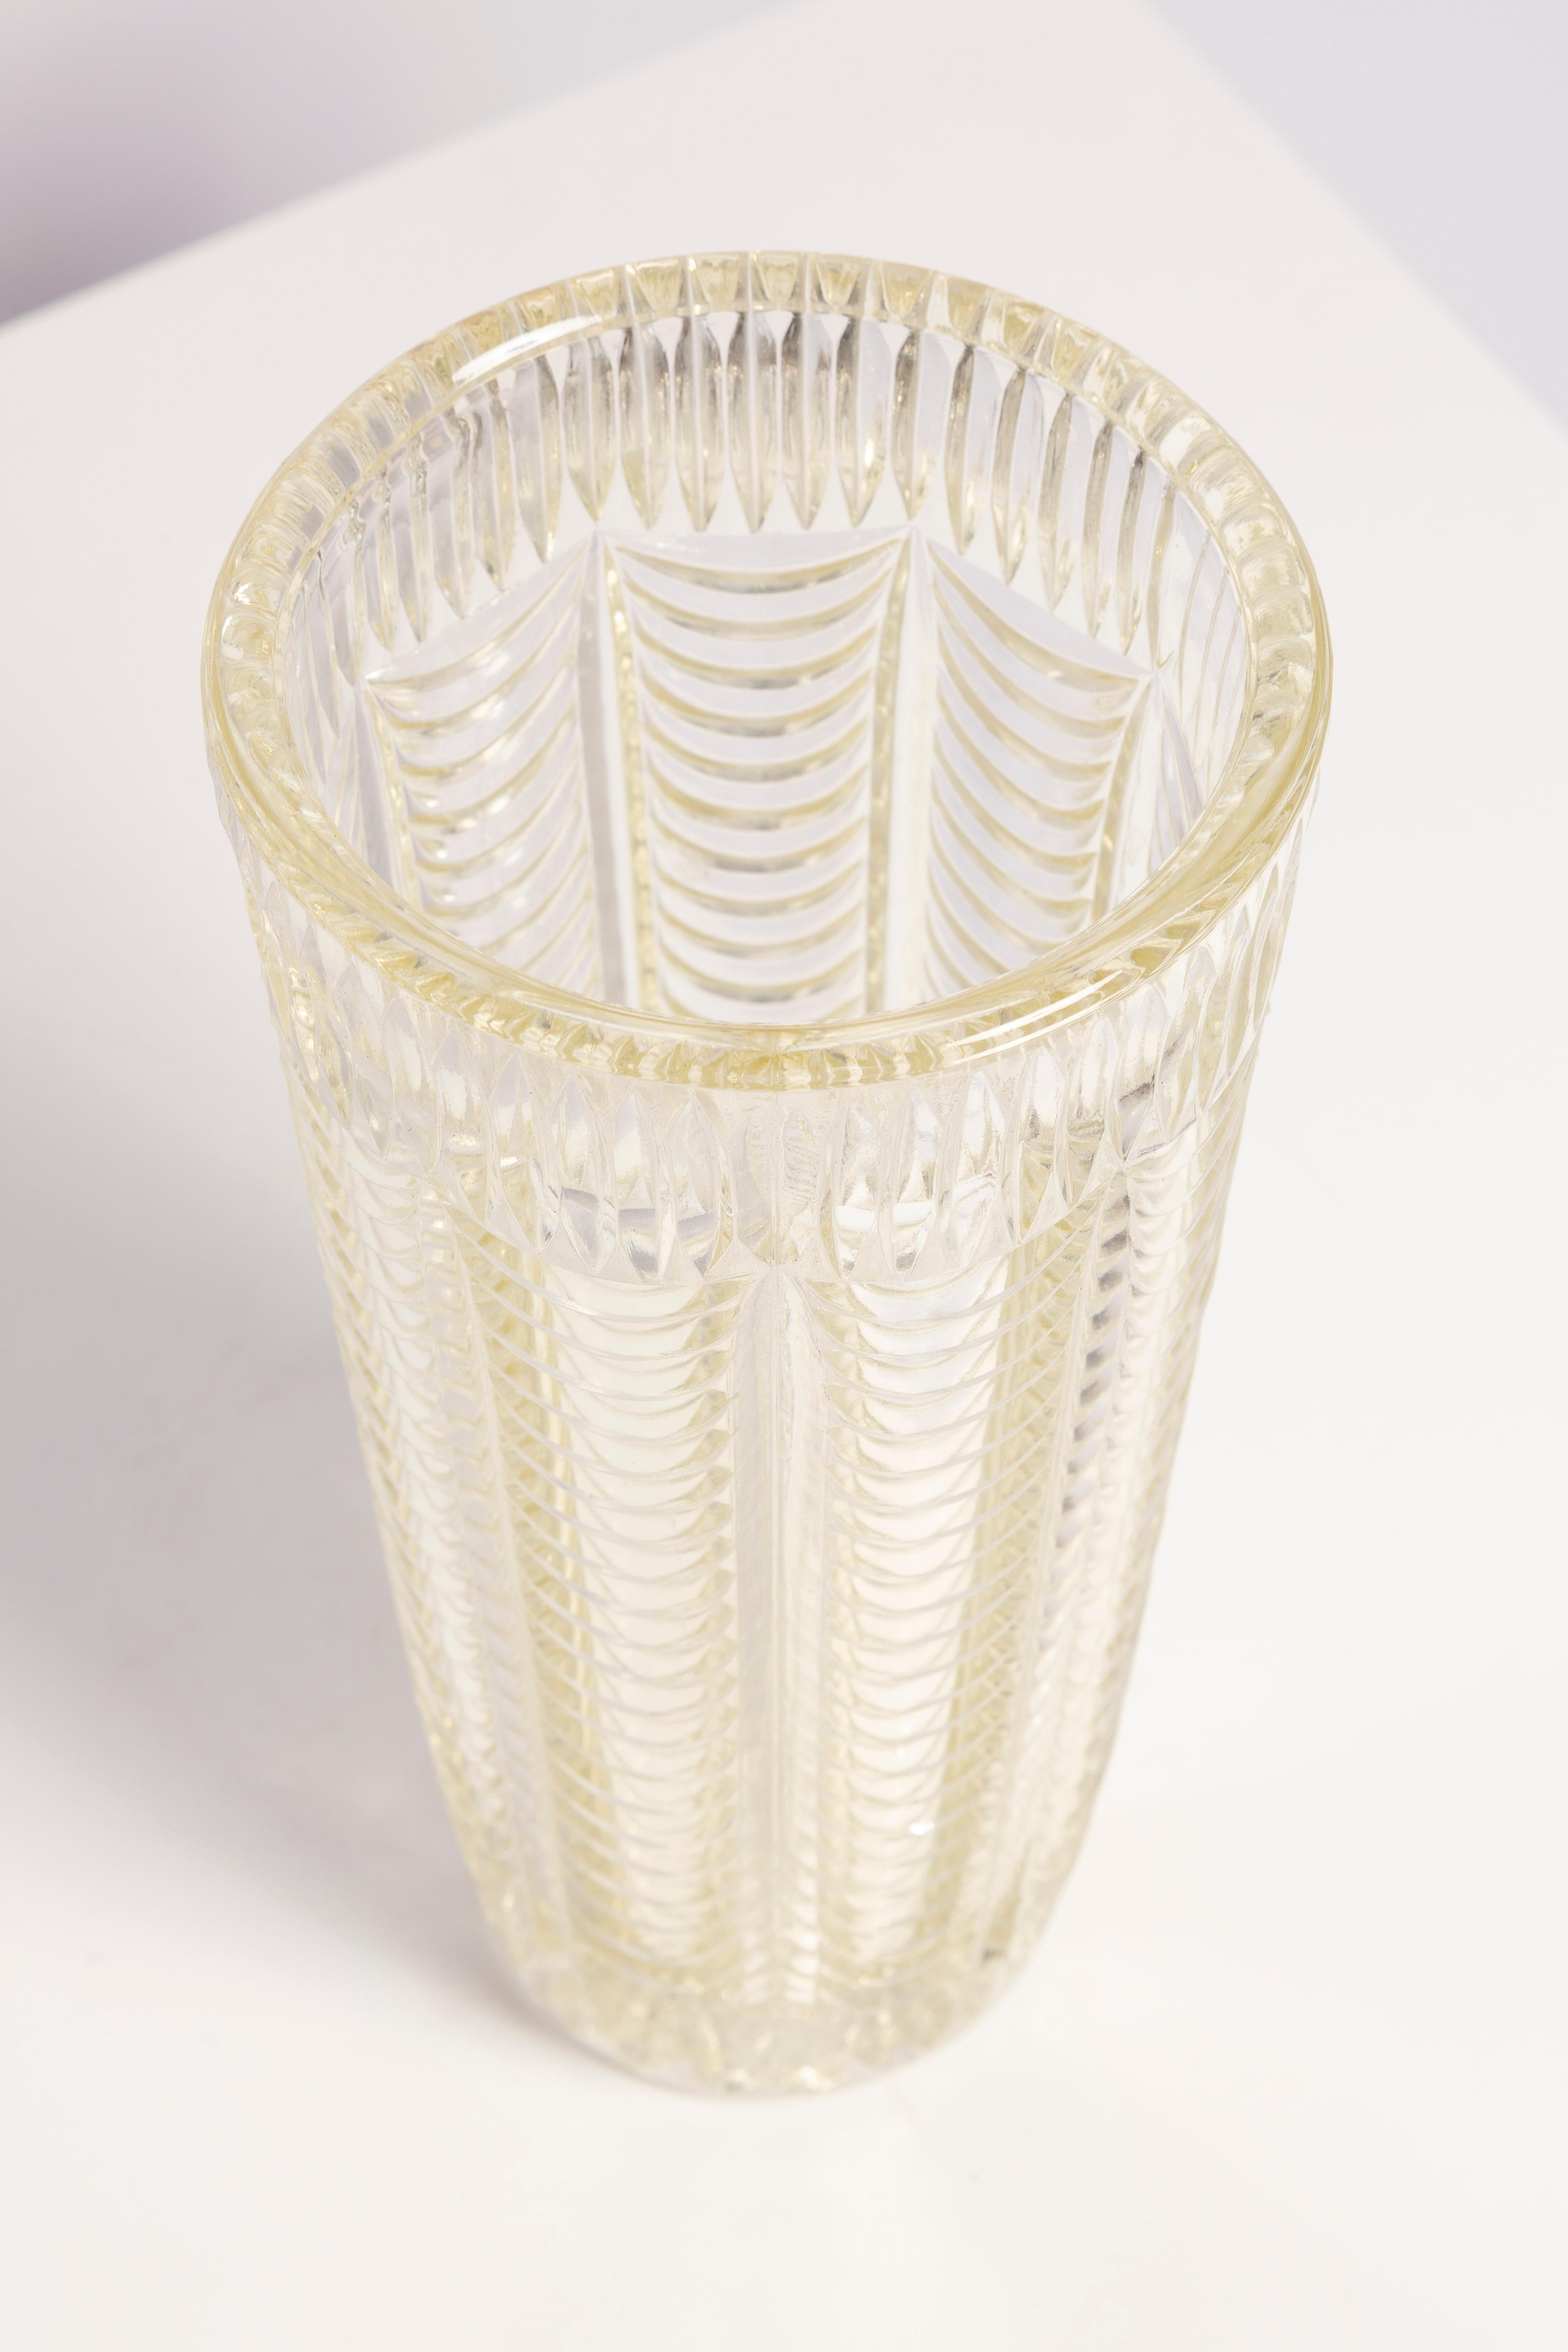 Czech Mid-Century Crystal Transparent Vase, Italy, 1960s For Sale